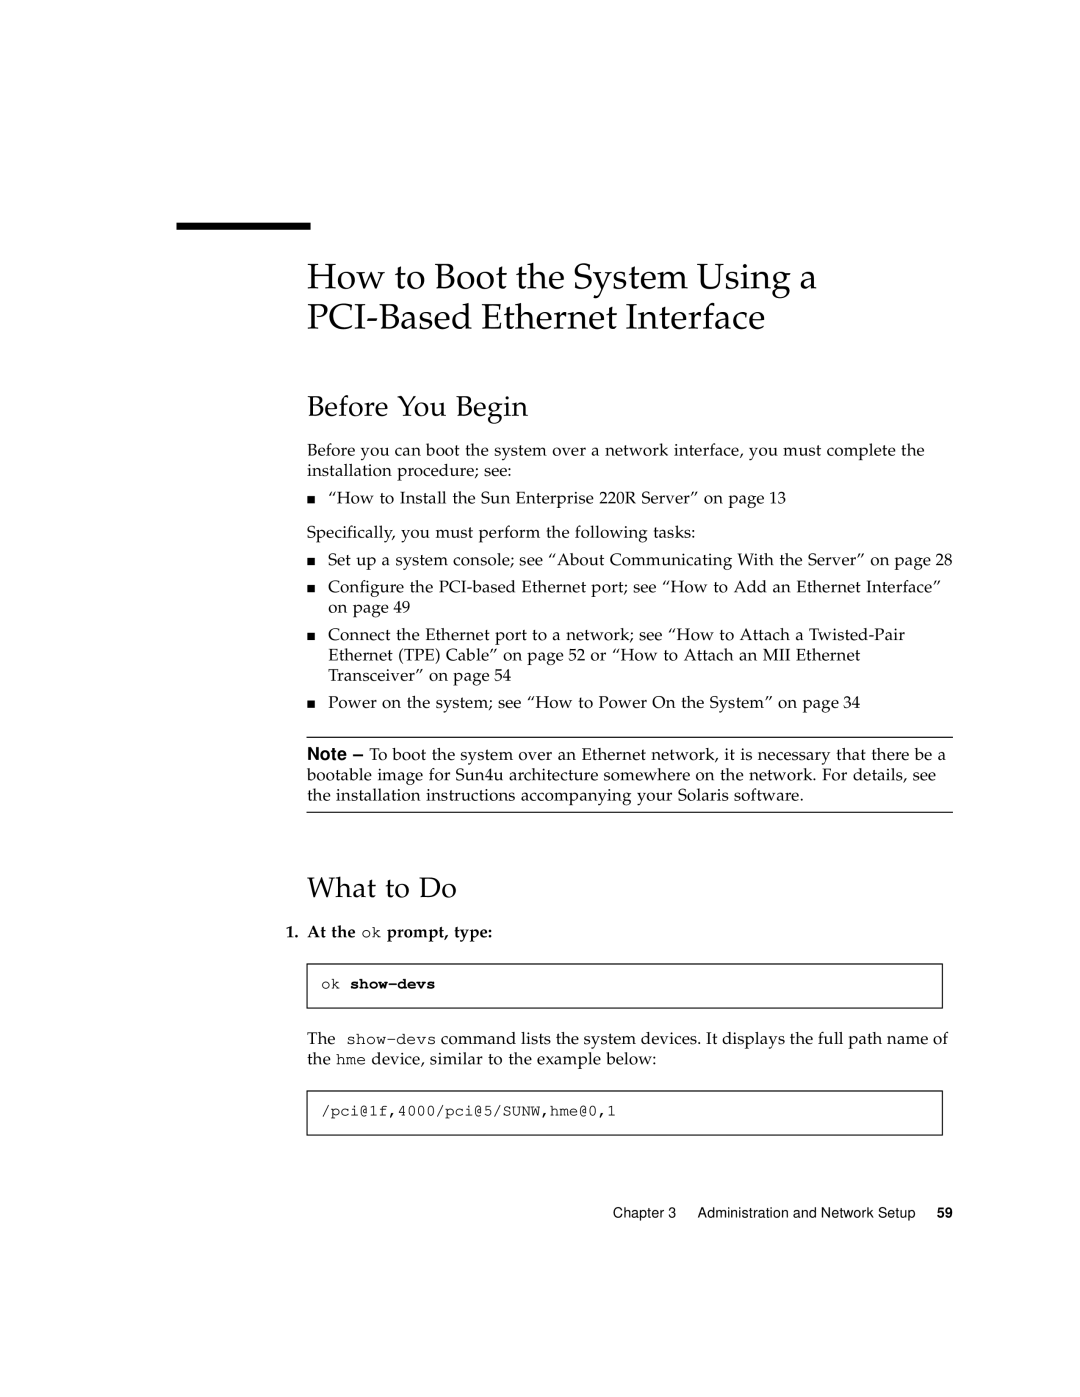 Sun Microsystems 220R manual How to Boot the System Using a PCI-Based Ethernet Interface, Before You Begin, What to Do 